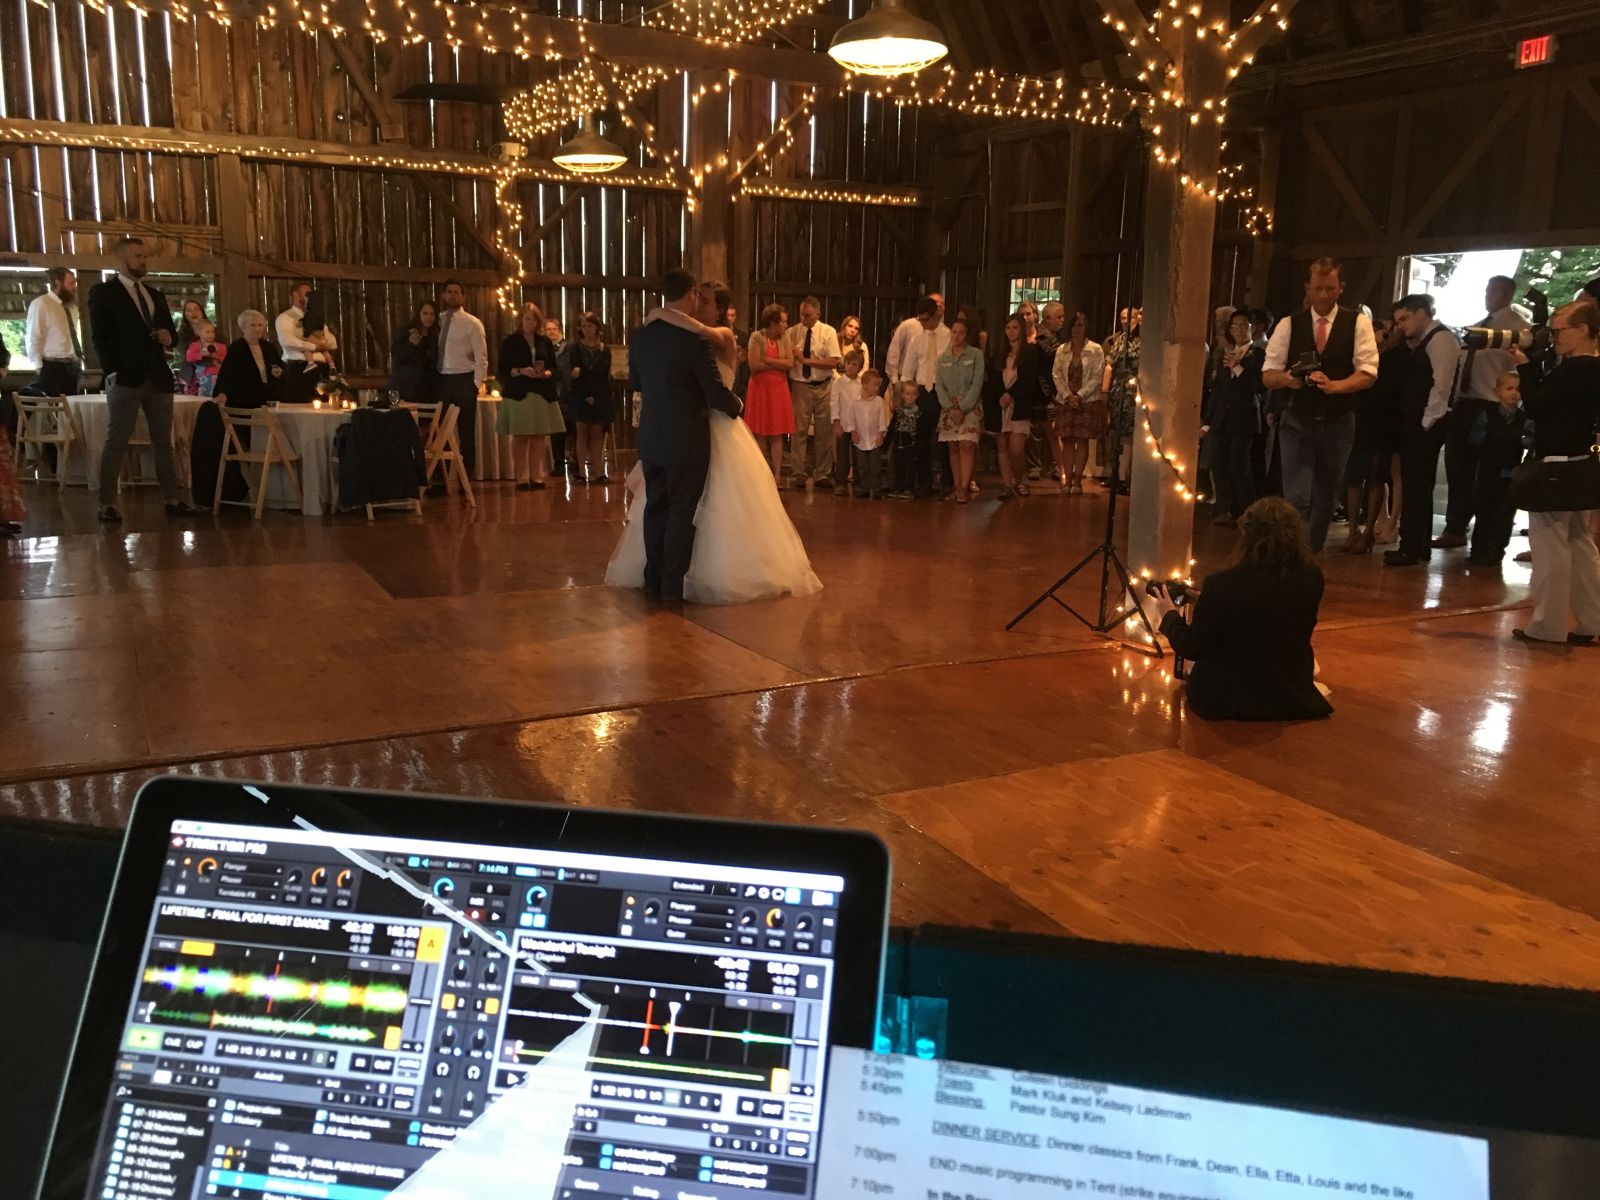 First Dance at Blue Sky Barn in Elmira with Pluister Entertainment